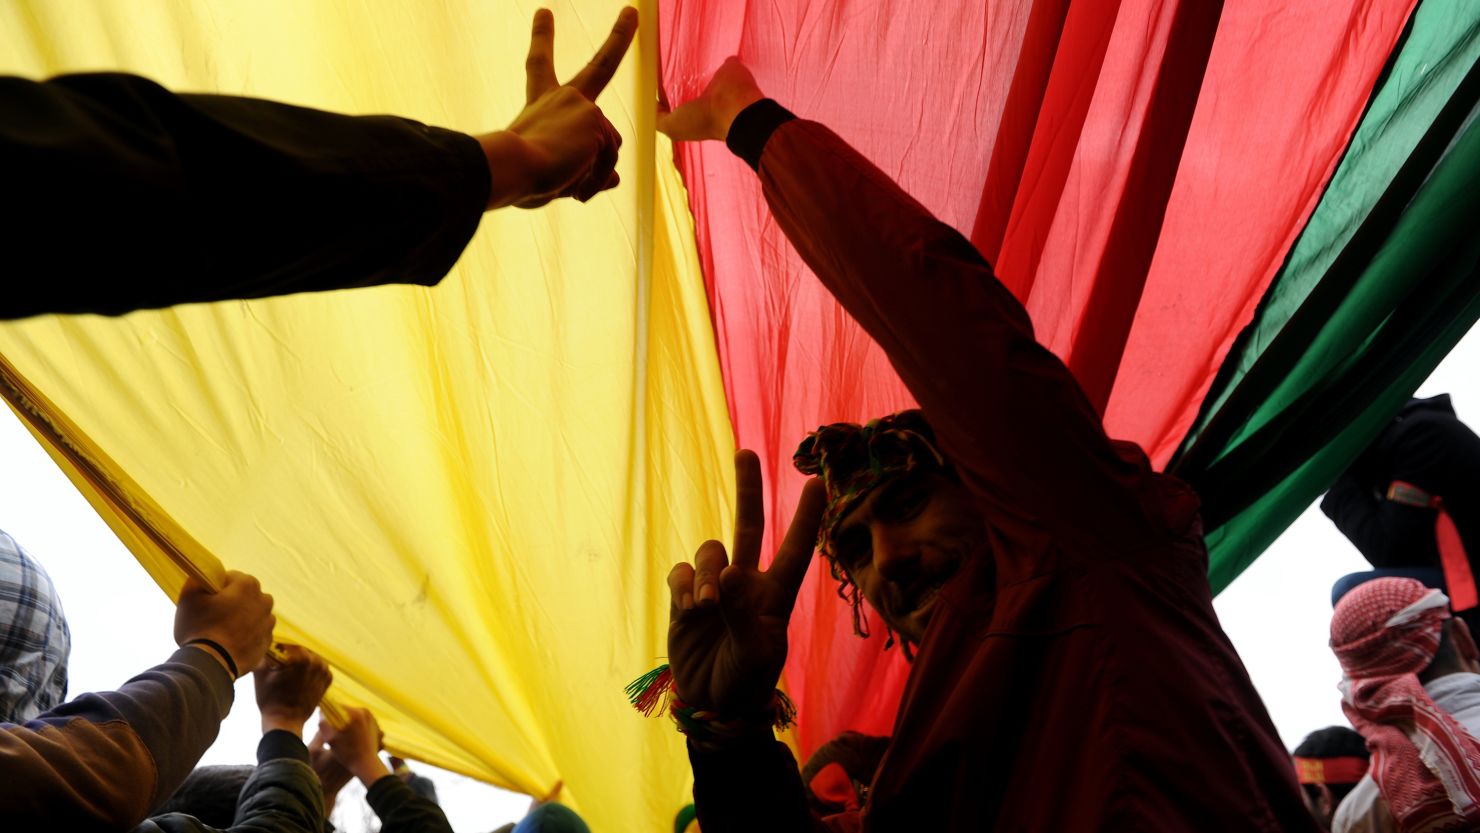 Kurds hold a giant flag of PKK (Kurdish Workers Party) and flash V-signs during celebrations on March 17, 2013 of Nowruz, the Persian New Year festival, in Kazlicesme, Istanbul.